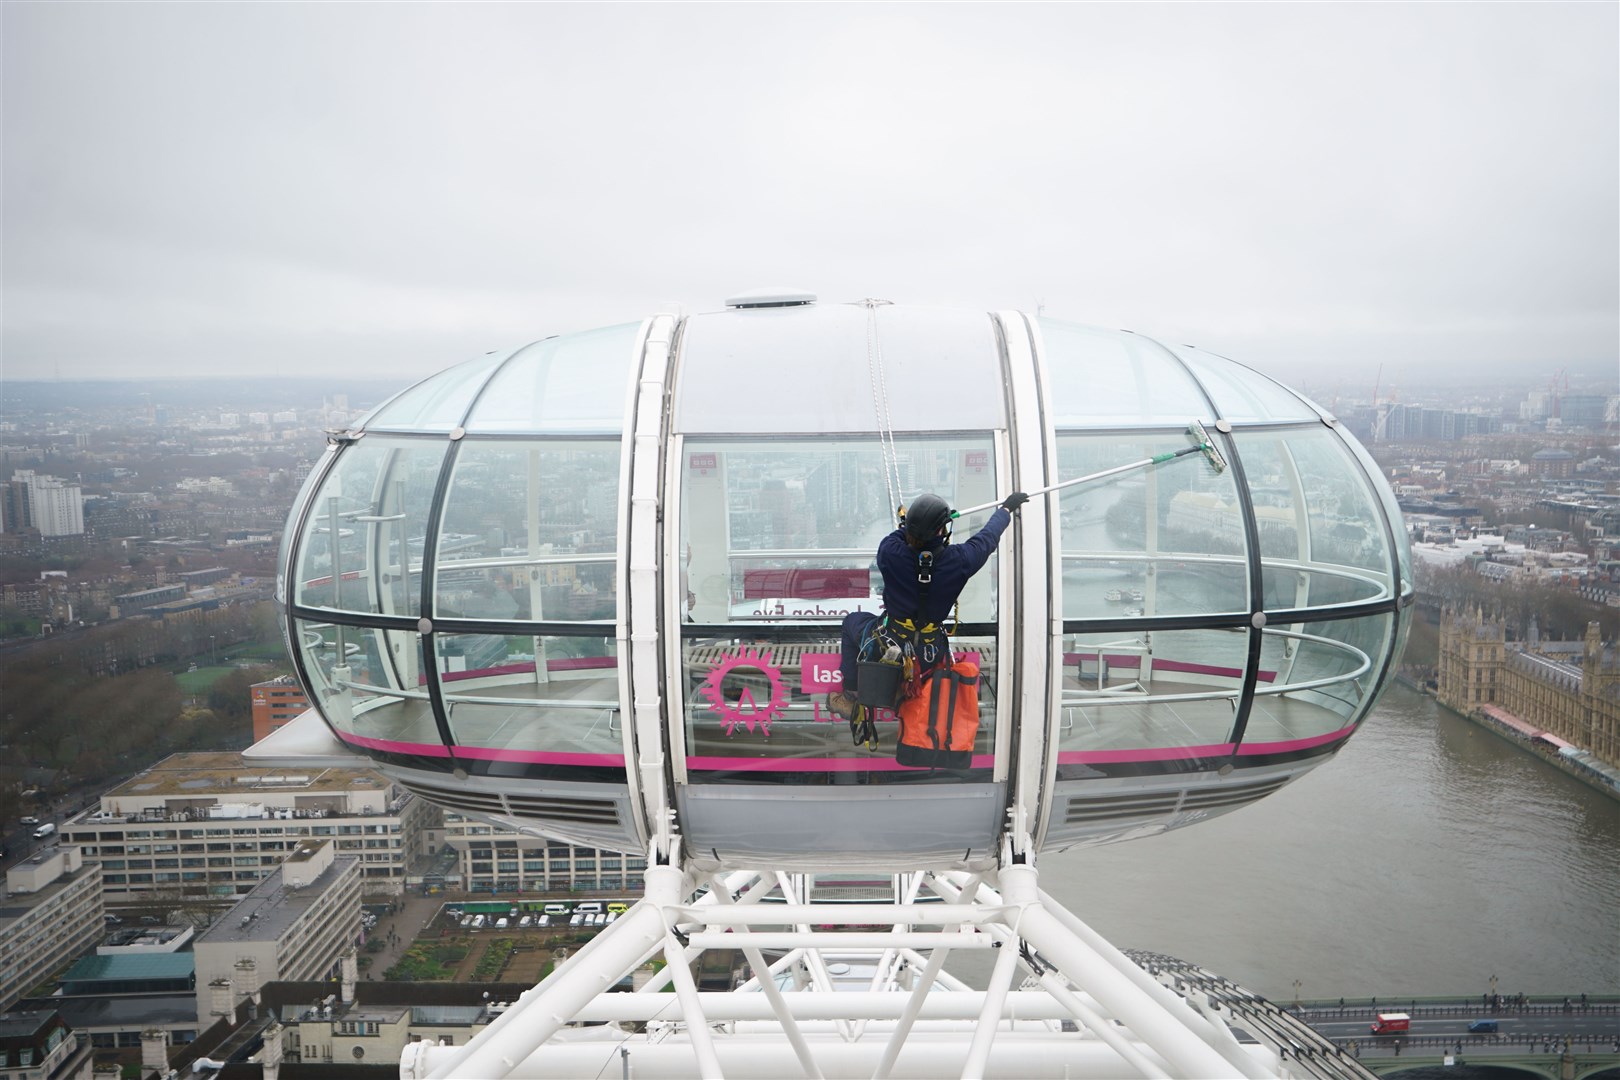 The cleaning crew wore harnesses and protective gear to scale the London landmark (James Manning/PA)